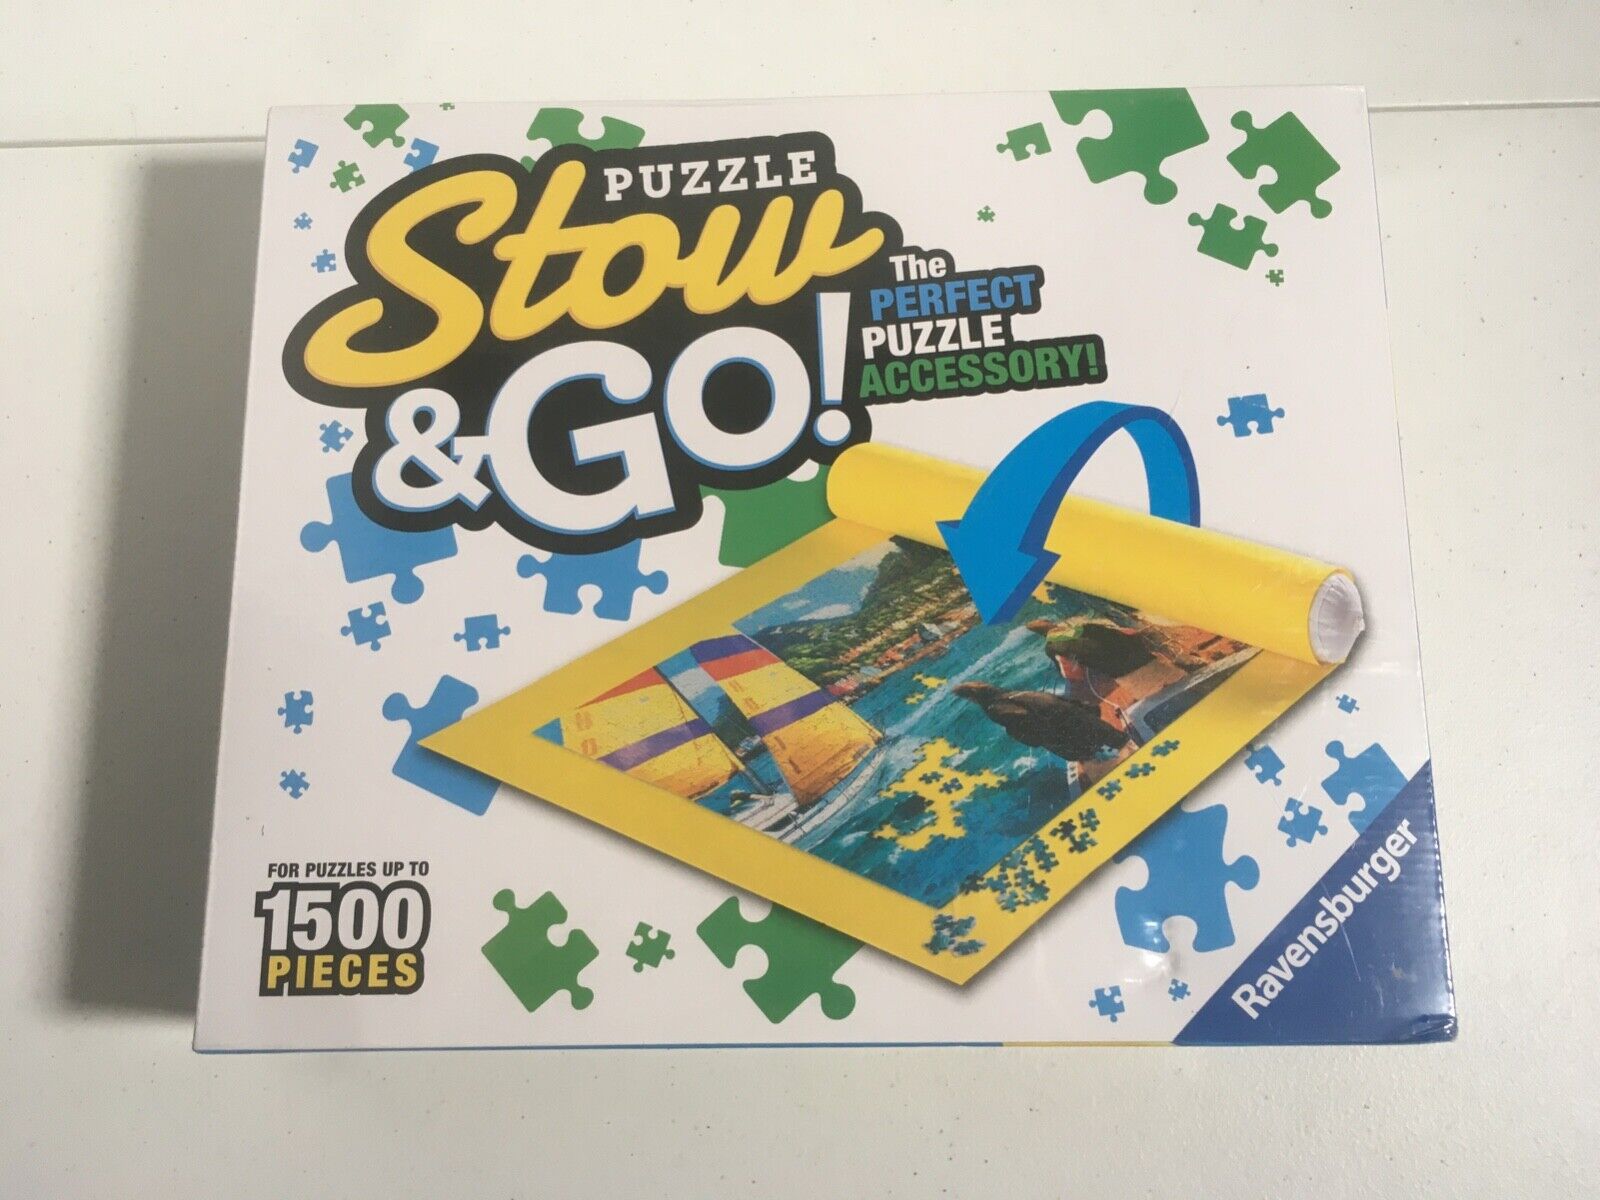 Puzzle Stow And Go by Ravensburger holds 1500 pieces Brand New & Sealed